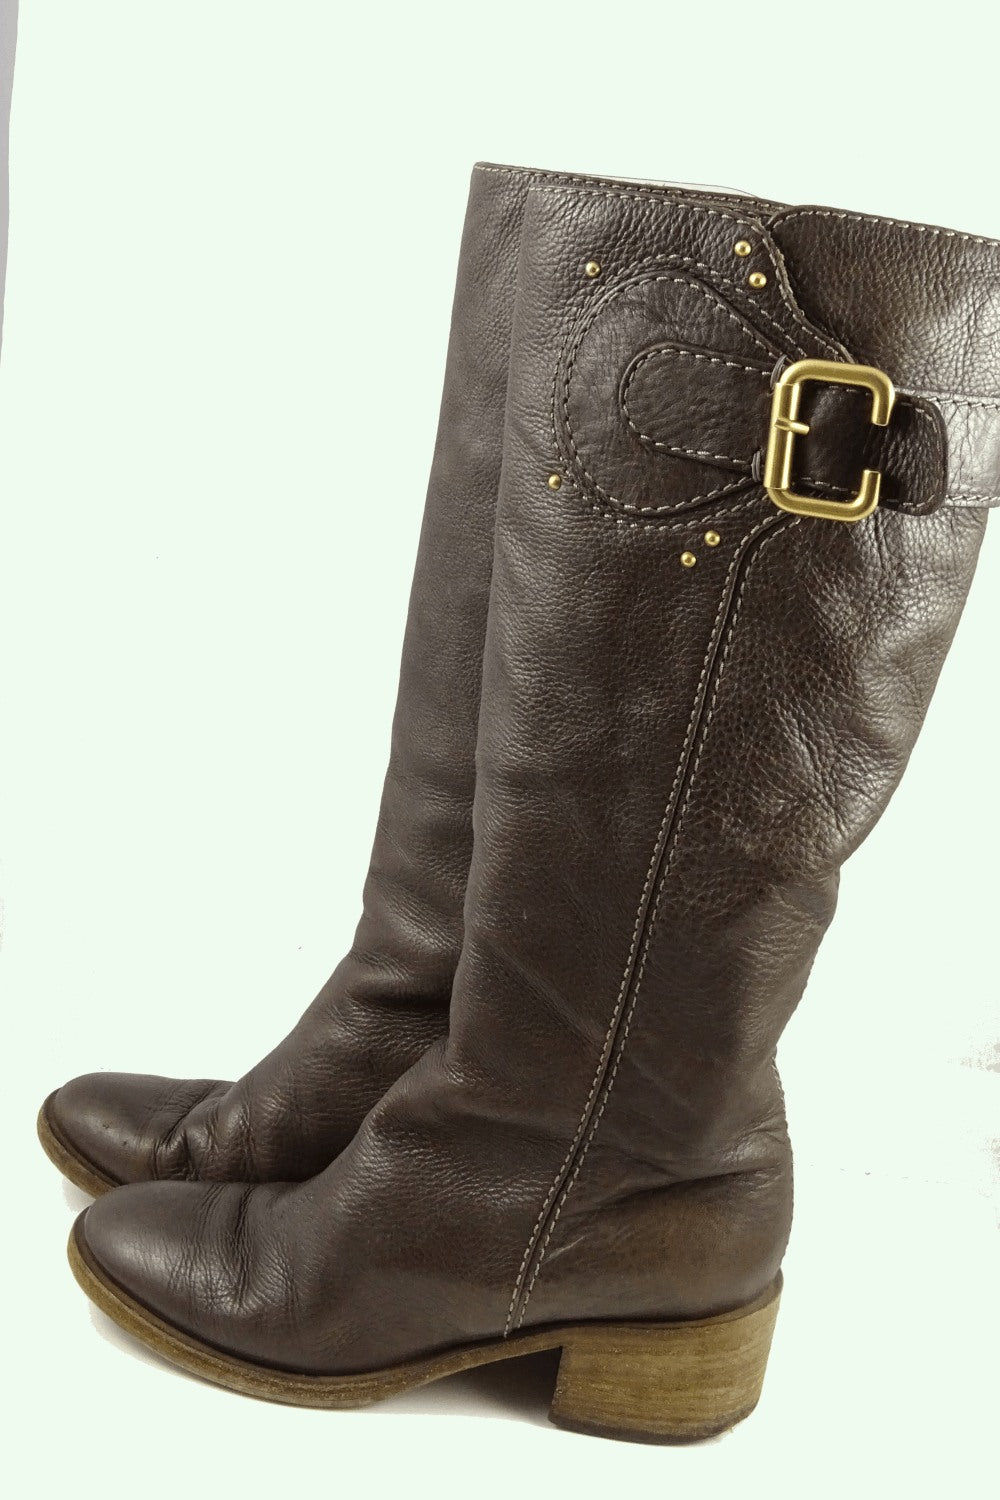 Genuine leather knee high boot with buckle detail on calf. Has signs of wear. Top of boot measure 33cm.